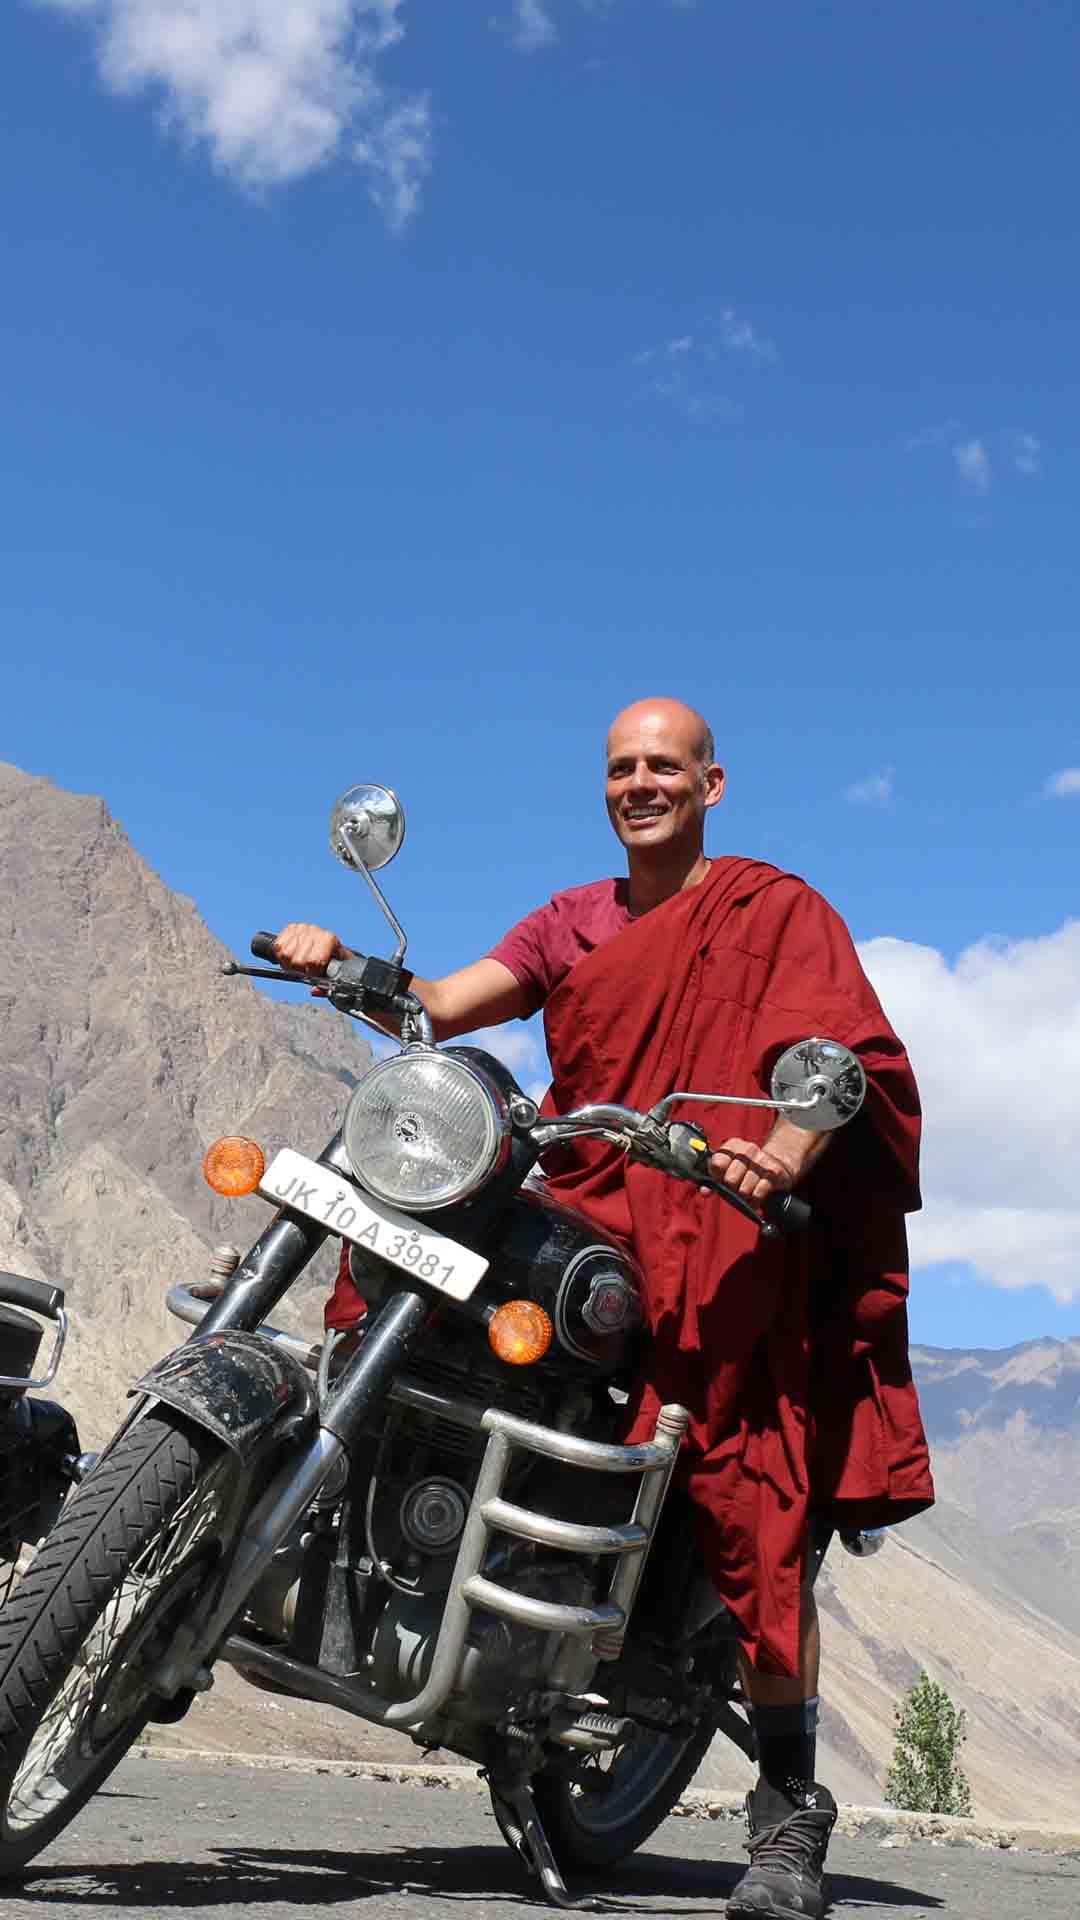 Buddhist Monasteries Circuit Tour to Indian Himalayas On Motorcycle I Adventurous & Holistic Tour To Leh and Ladakh on a Bike